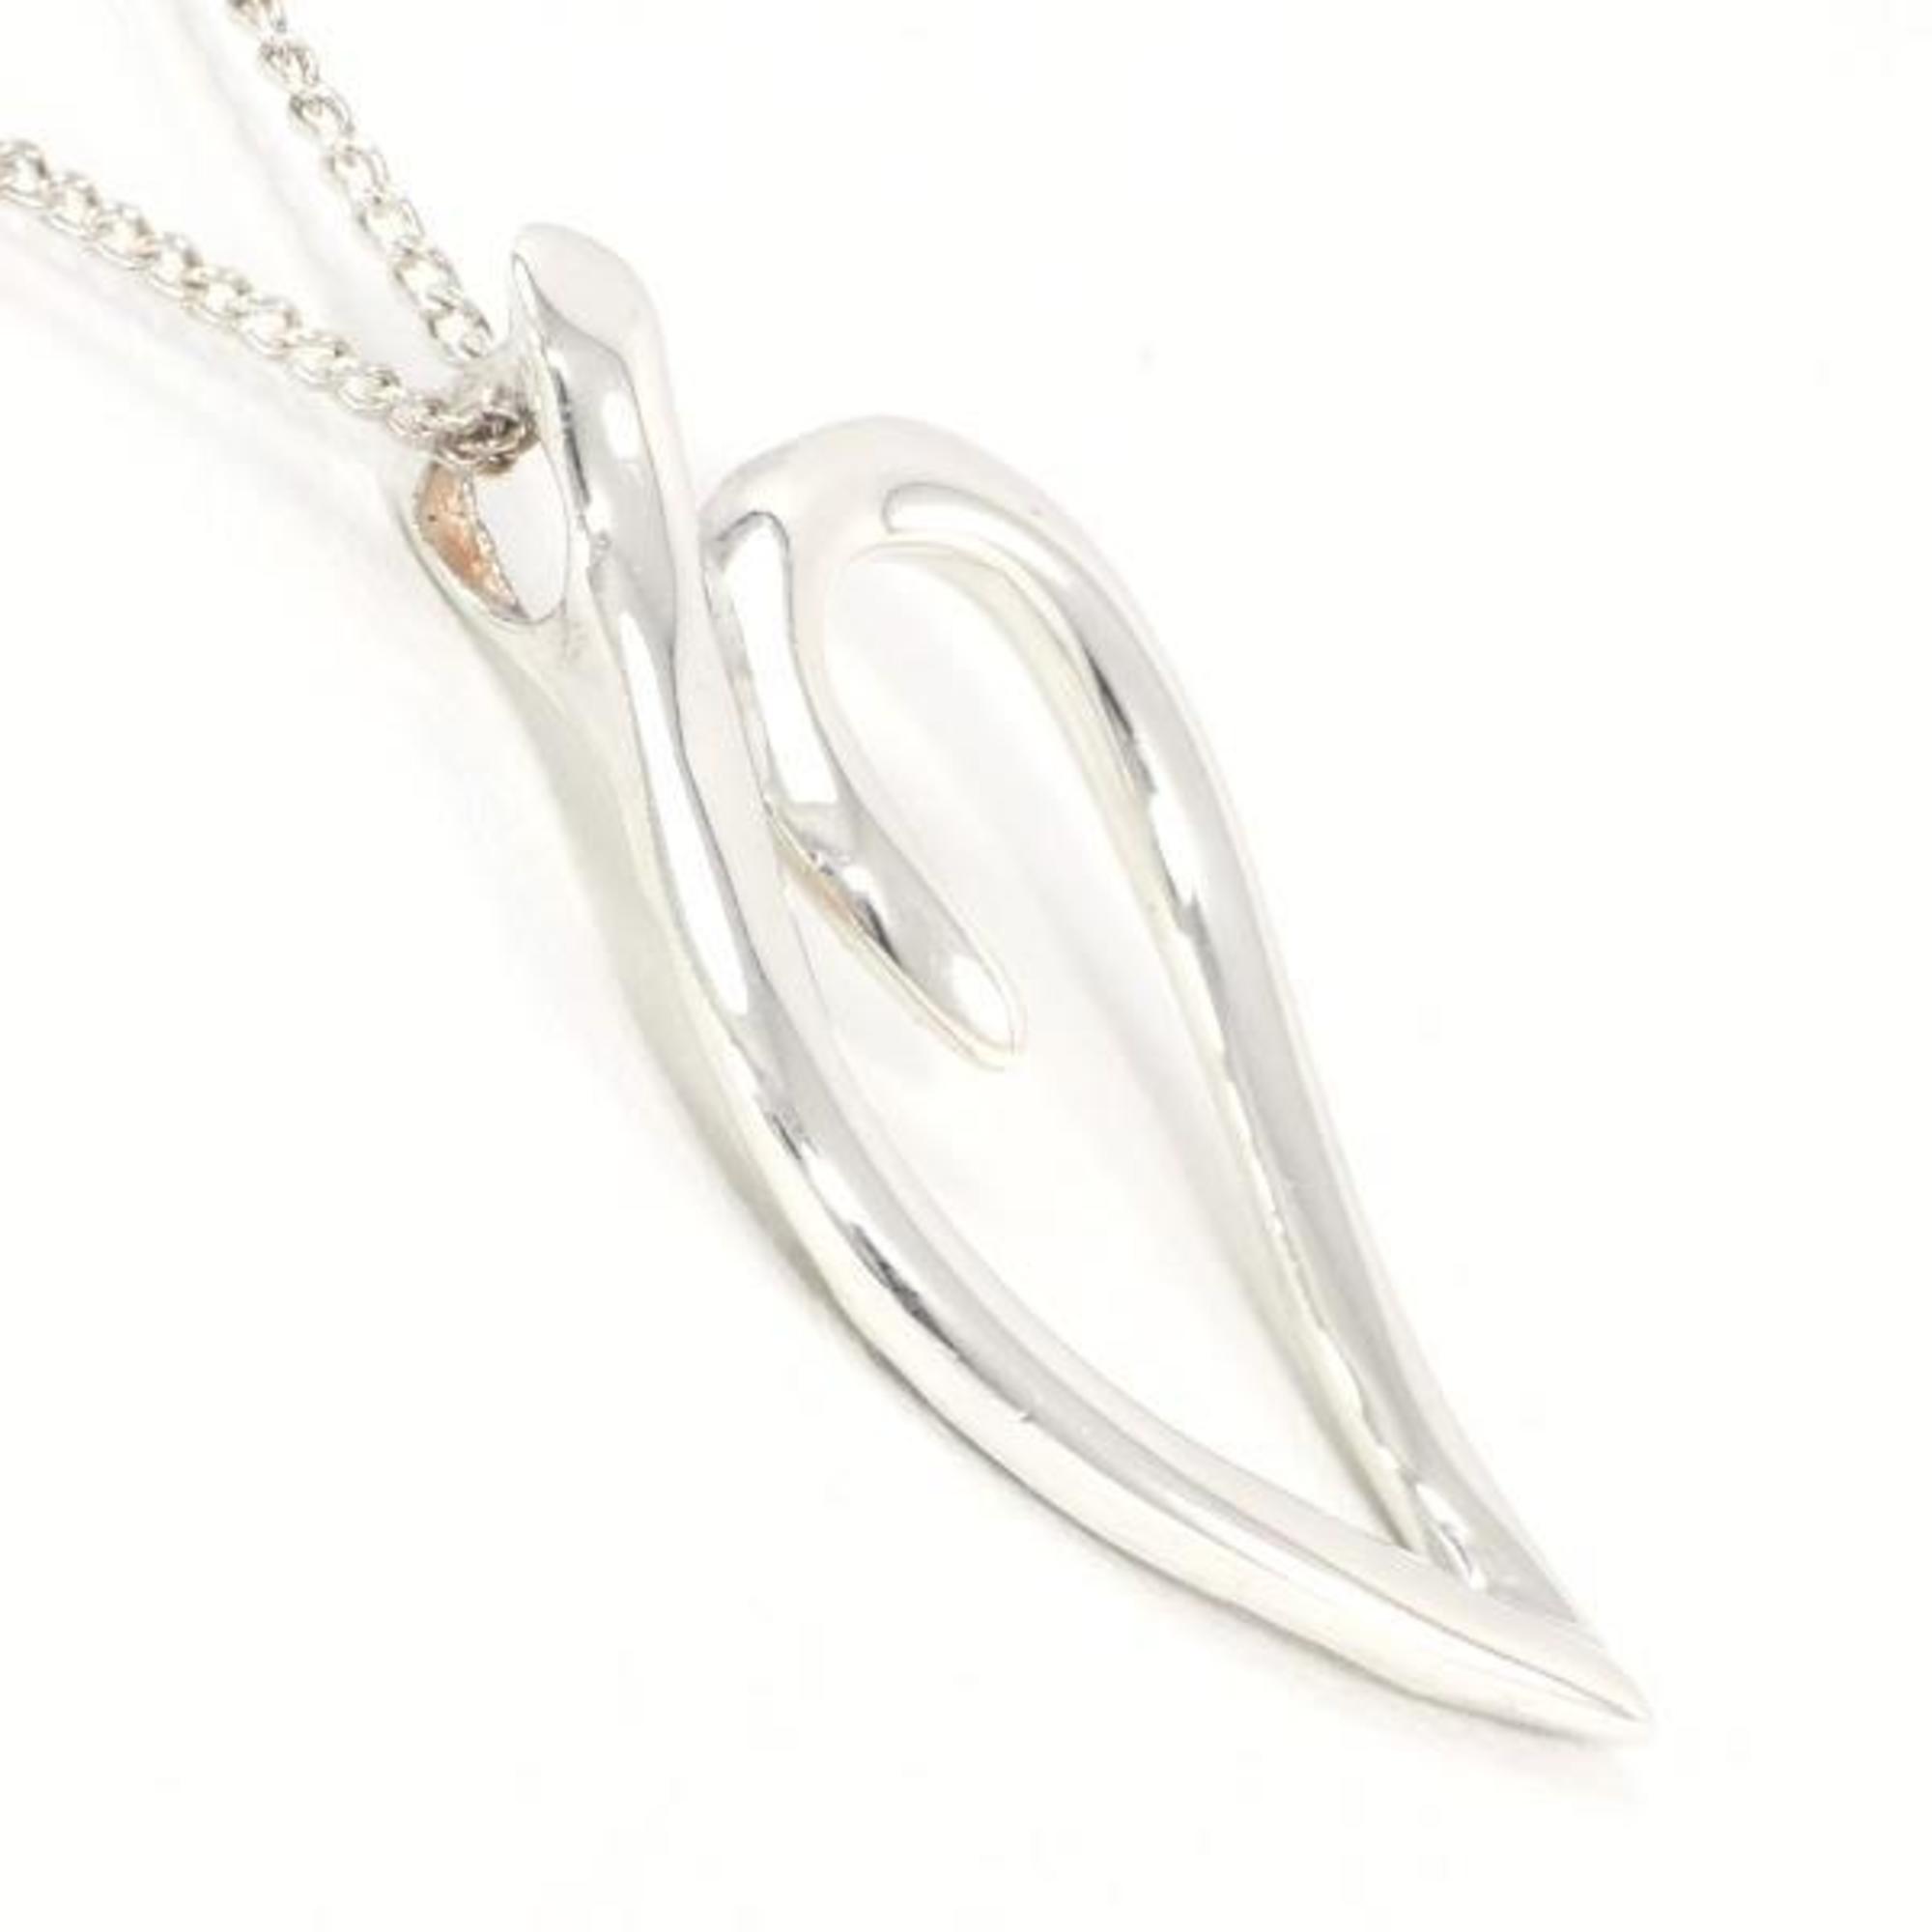 Tiffany Open Leaf Silver Necklace Total Weight Approx. 2.4g 50cm Jewelry